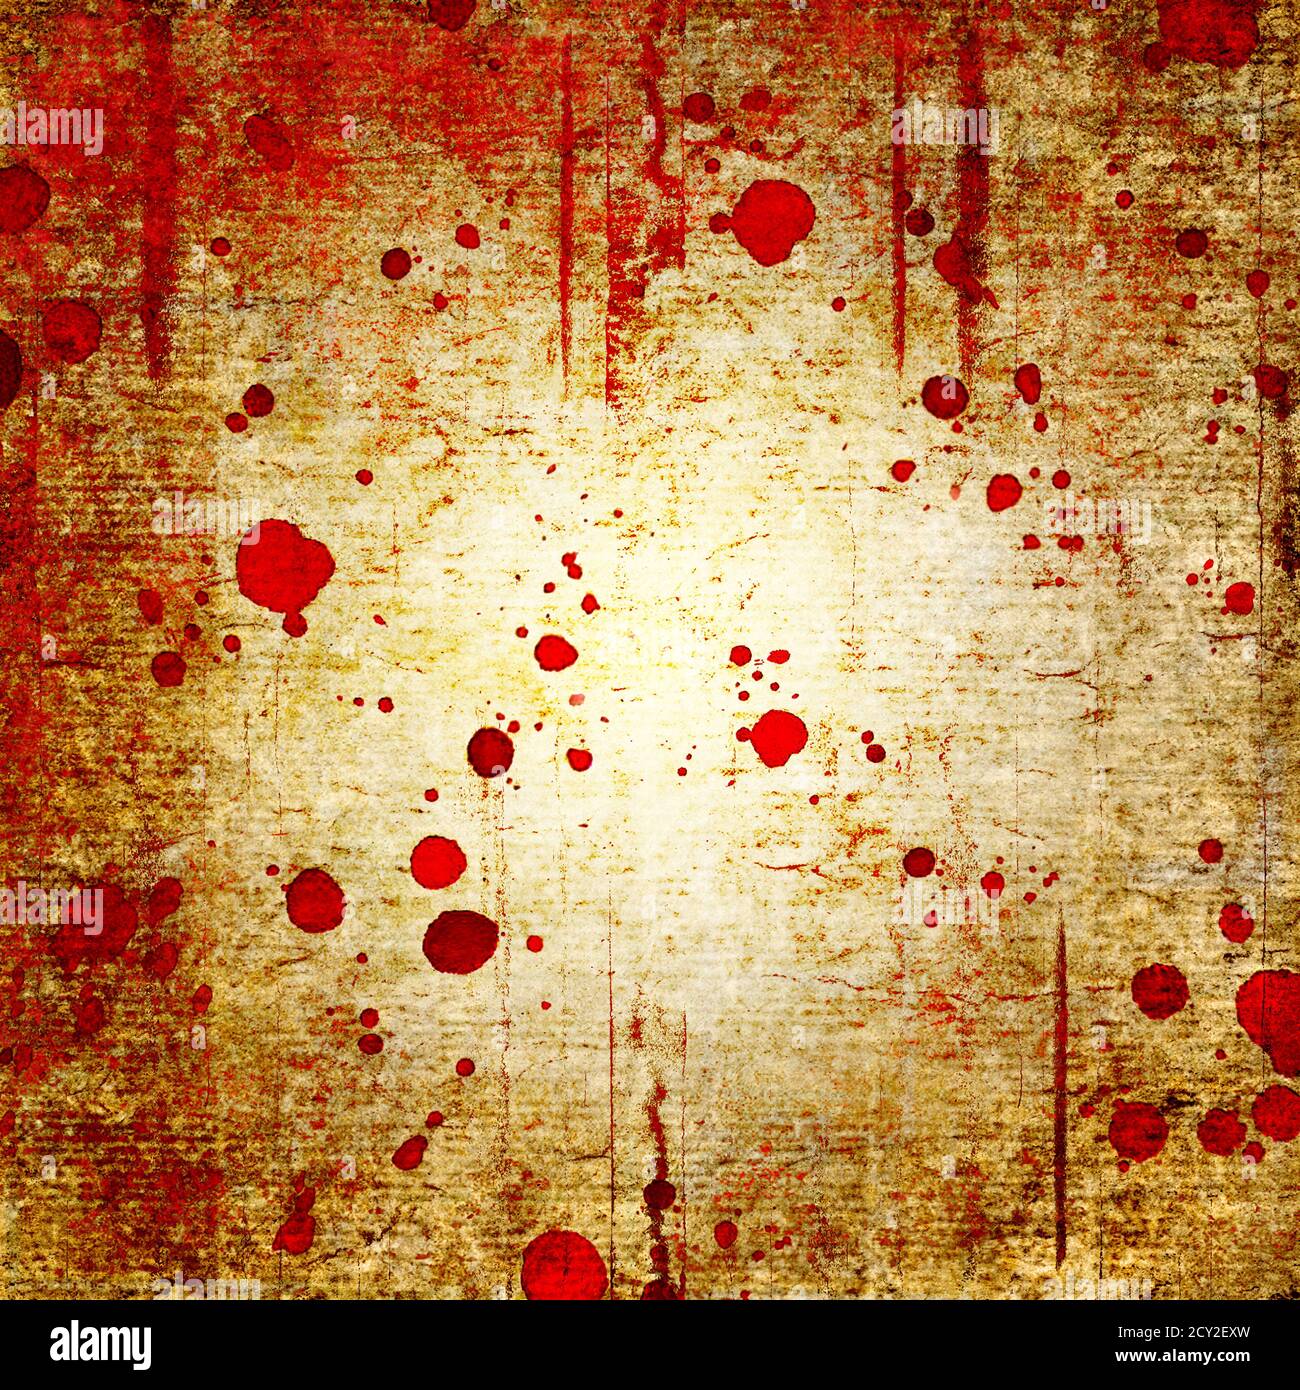 Bloody blood red grunge background. Vntage abstract texture background.  Watercolor hand drawn aged pattern with space for text and red blood blots.  Re Stock Photo - Alamy